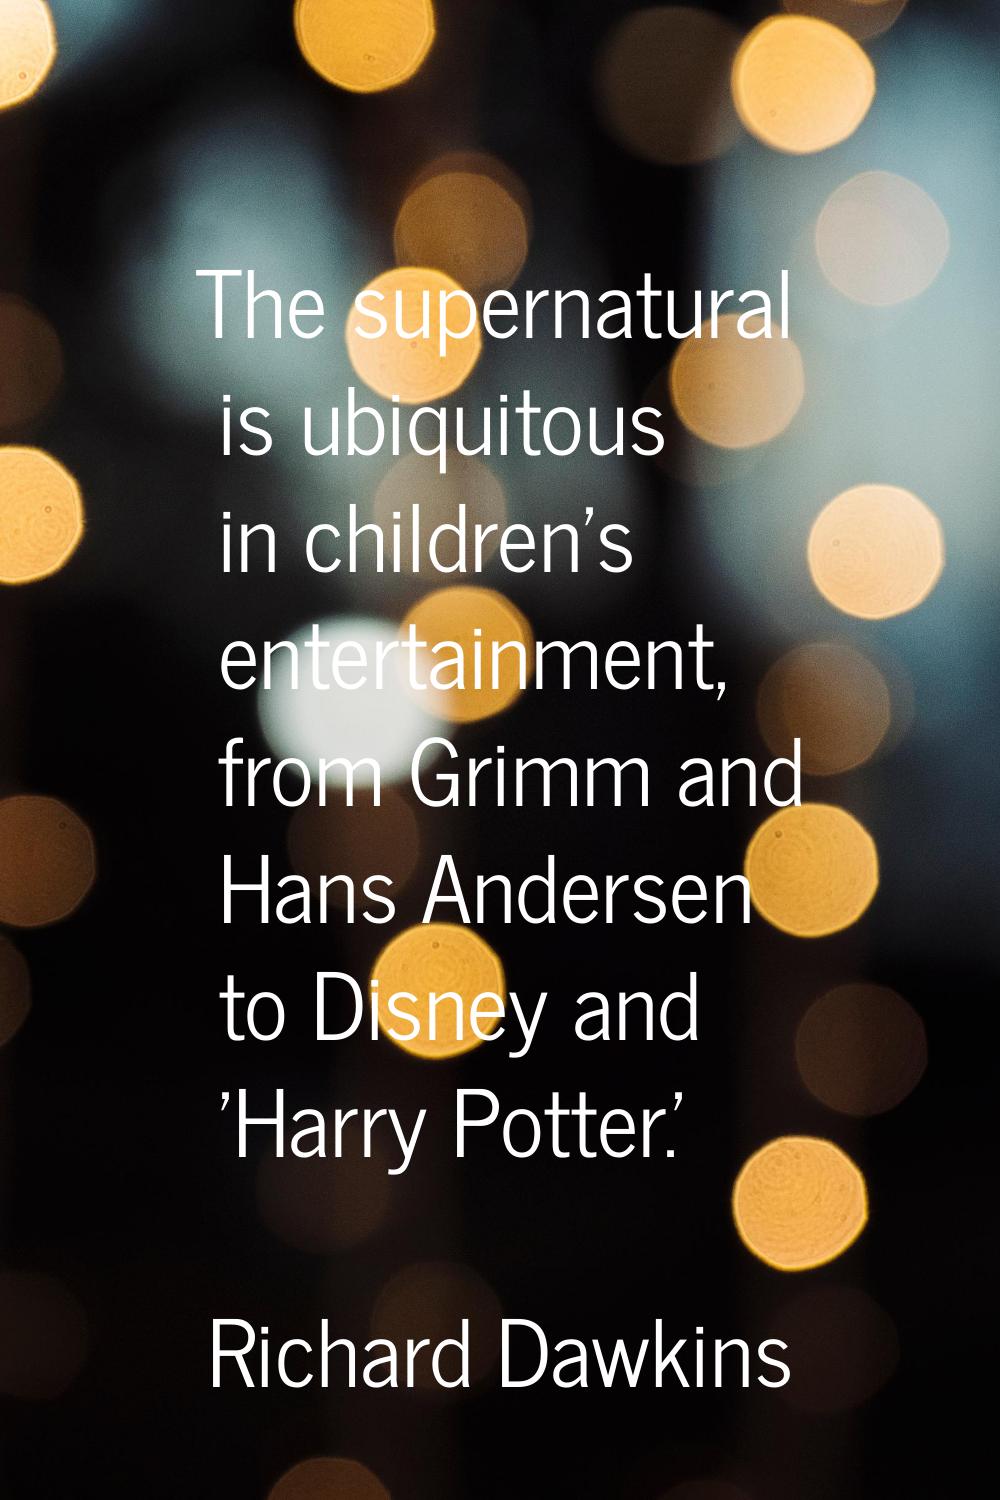 The supernatural is ubiquitous in children's entertainment, from Grimm and Hans Andersen to Disney 